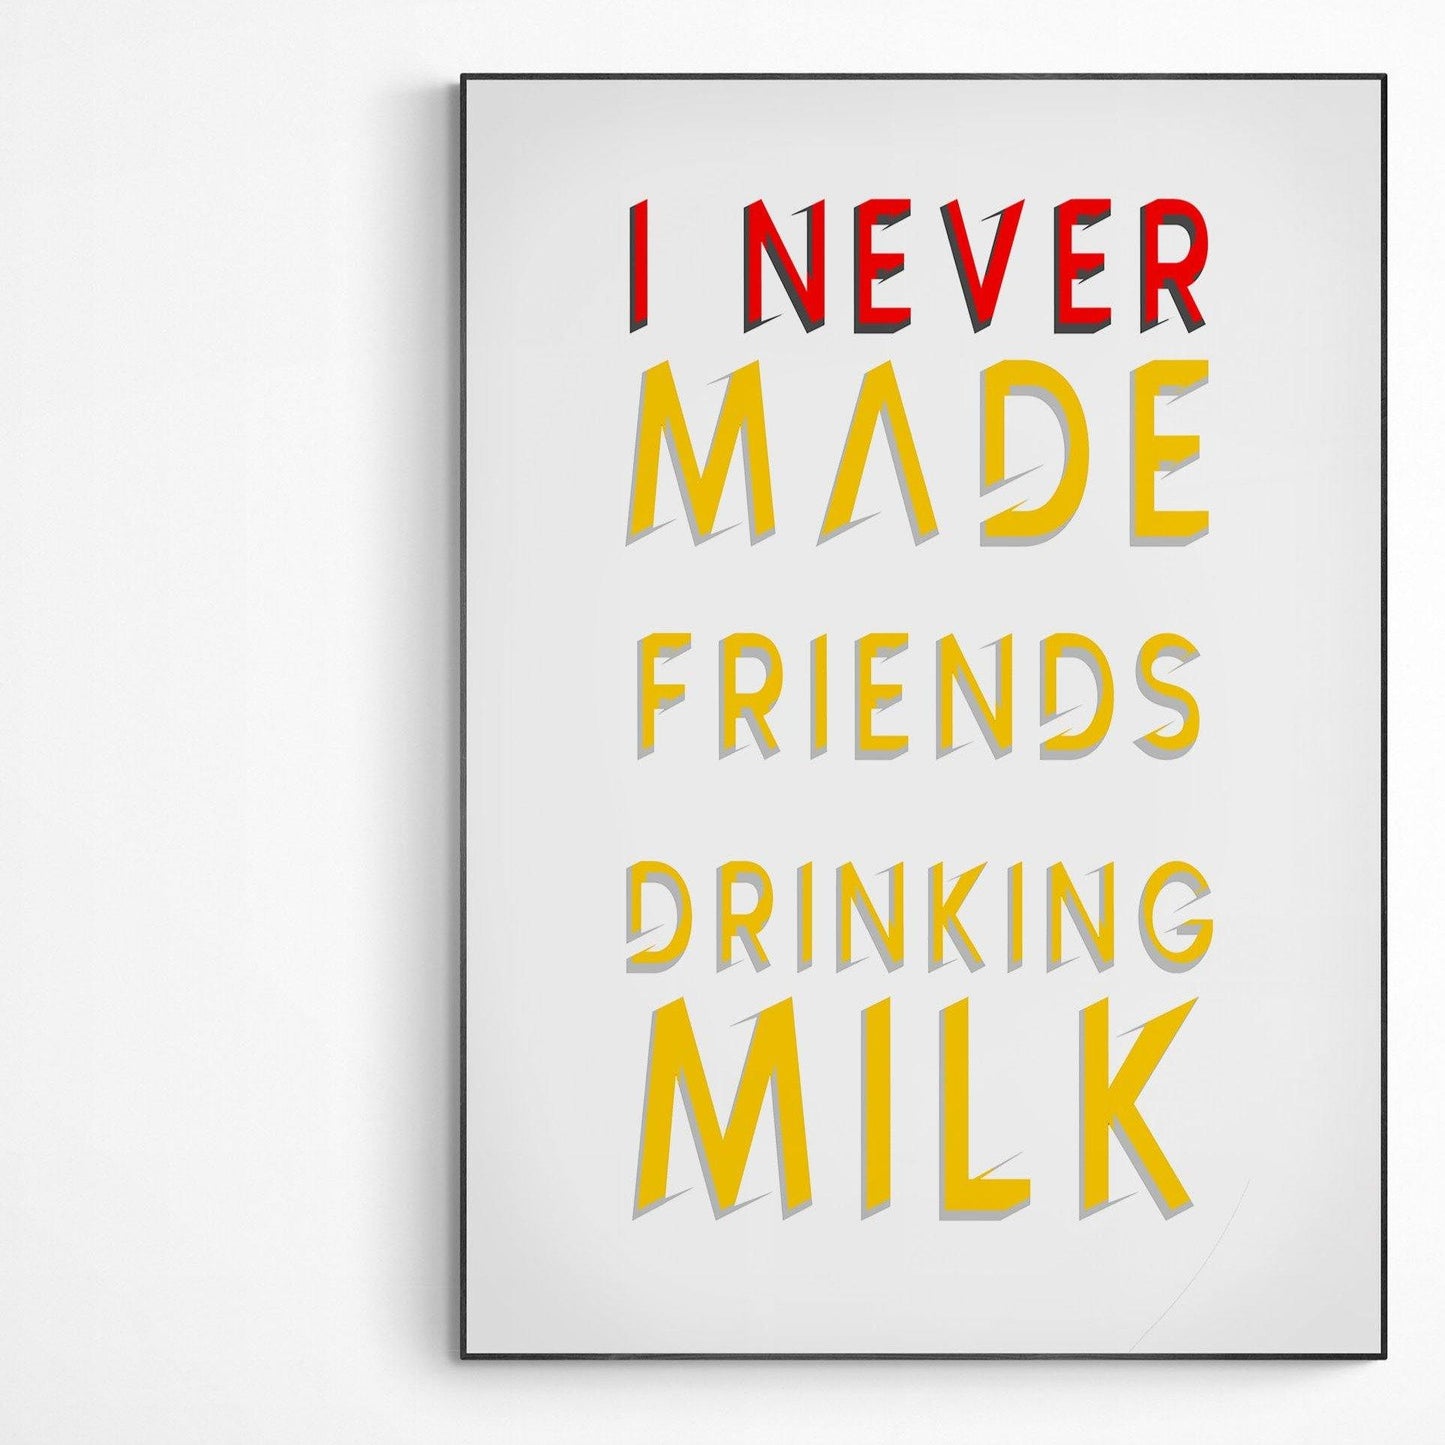 I Never Made Friends Drinking Milk Poster | Original Print Art | Motivational Poster Wall Art Decor | Greeting Card Gifts | Variety Sizes